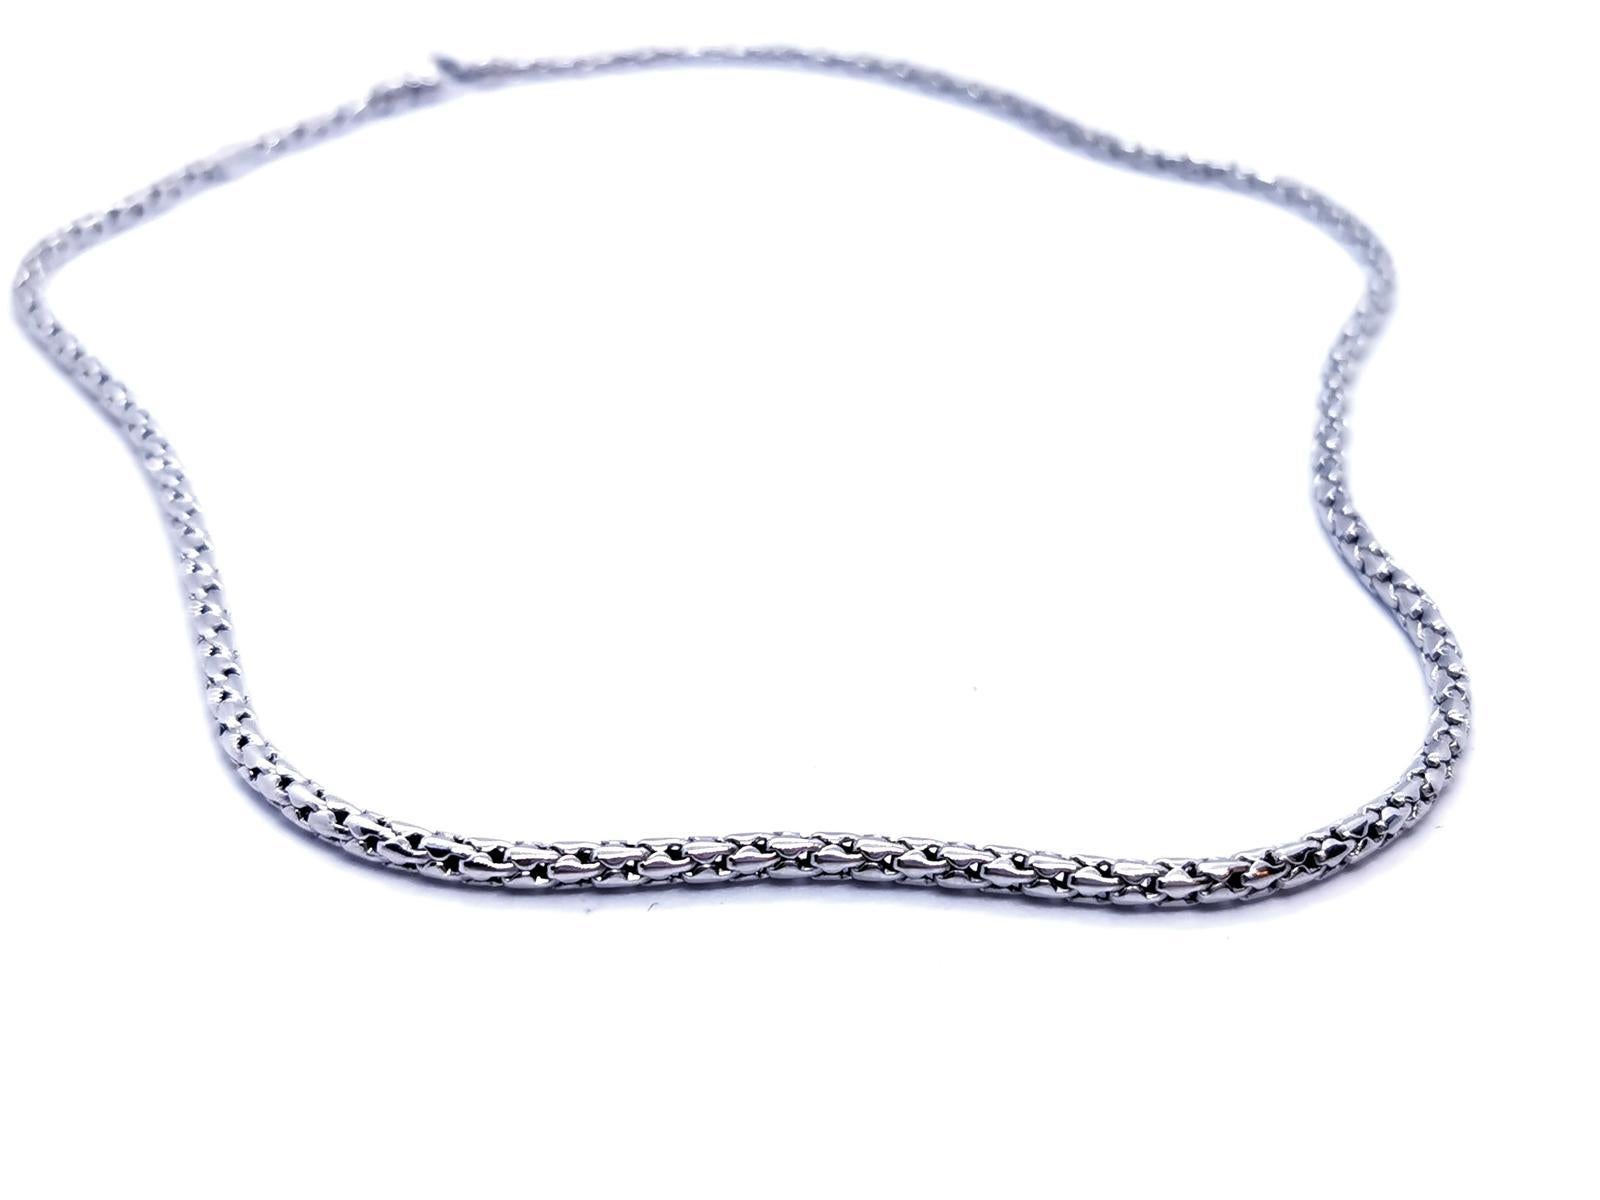 white gold necklace 750 mils (18 carats). length: 45.5 cm. width: 0.29 cm. total weight: 15.18 g. punched excellent condition
